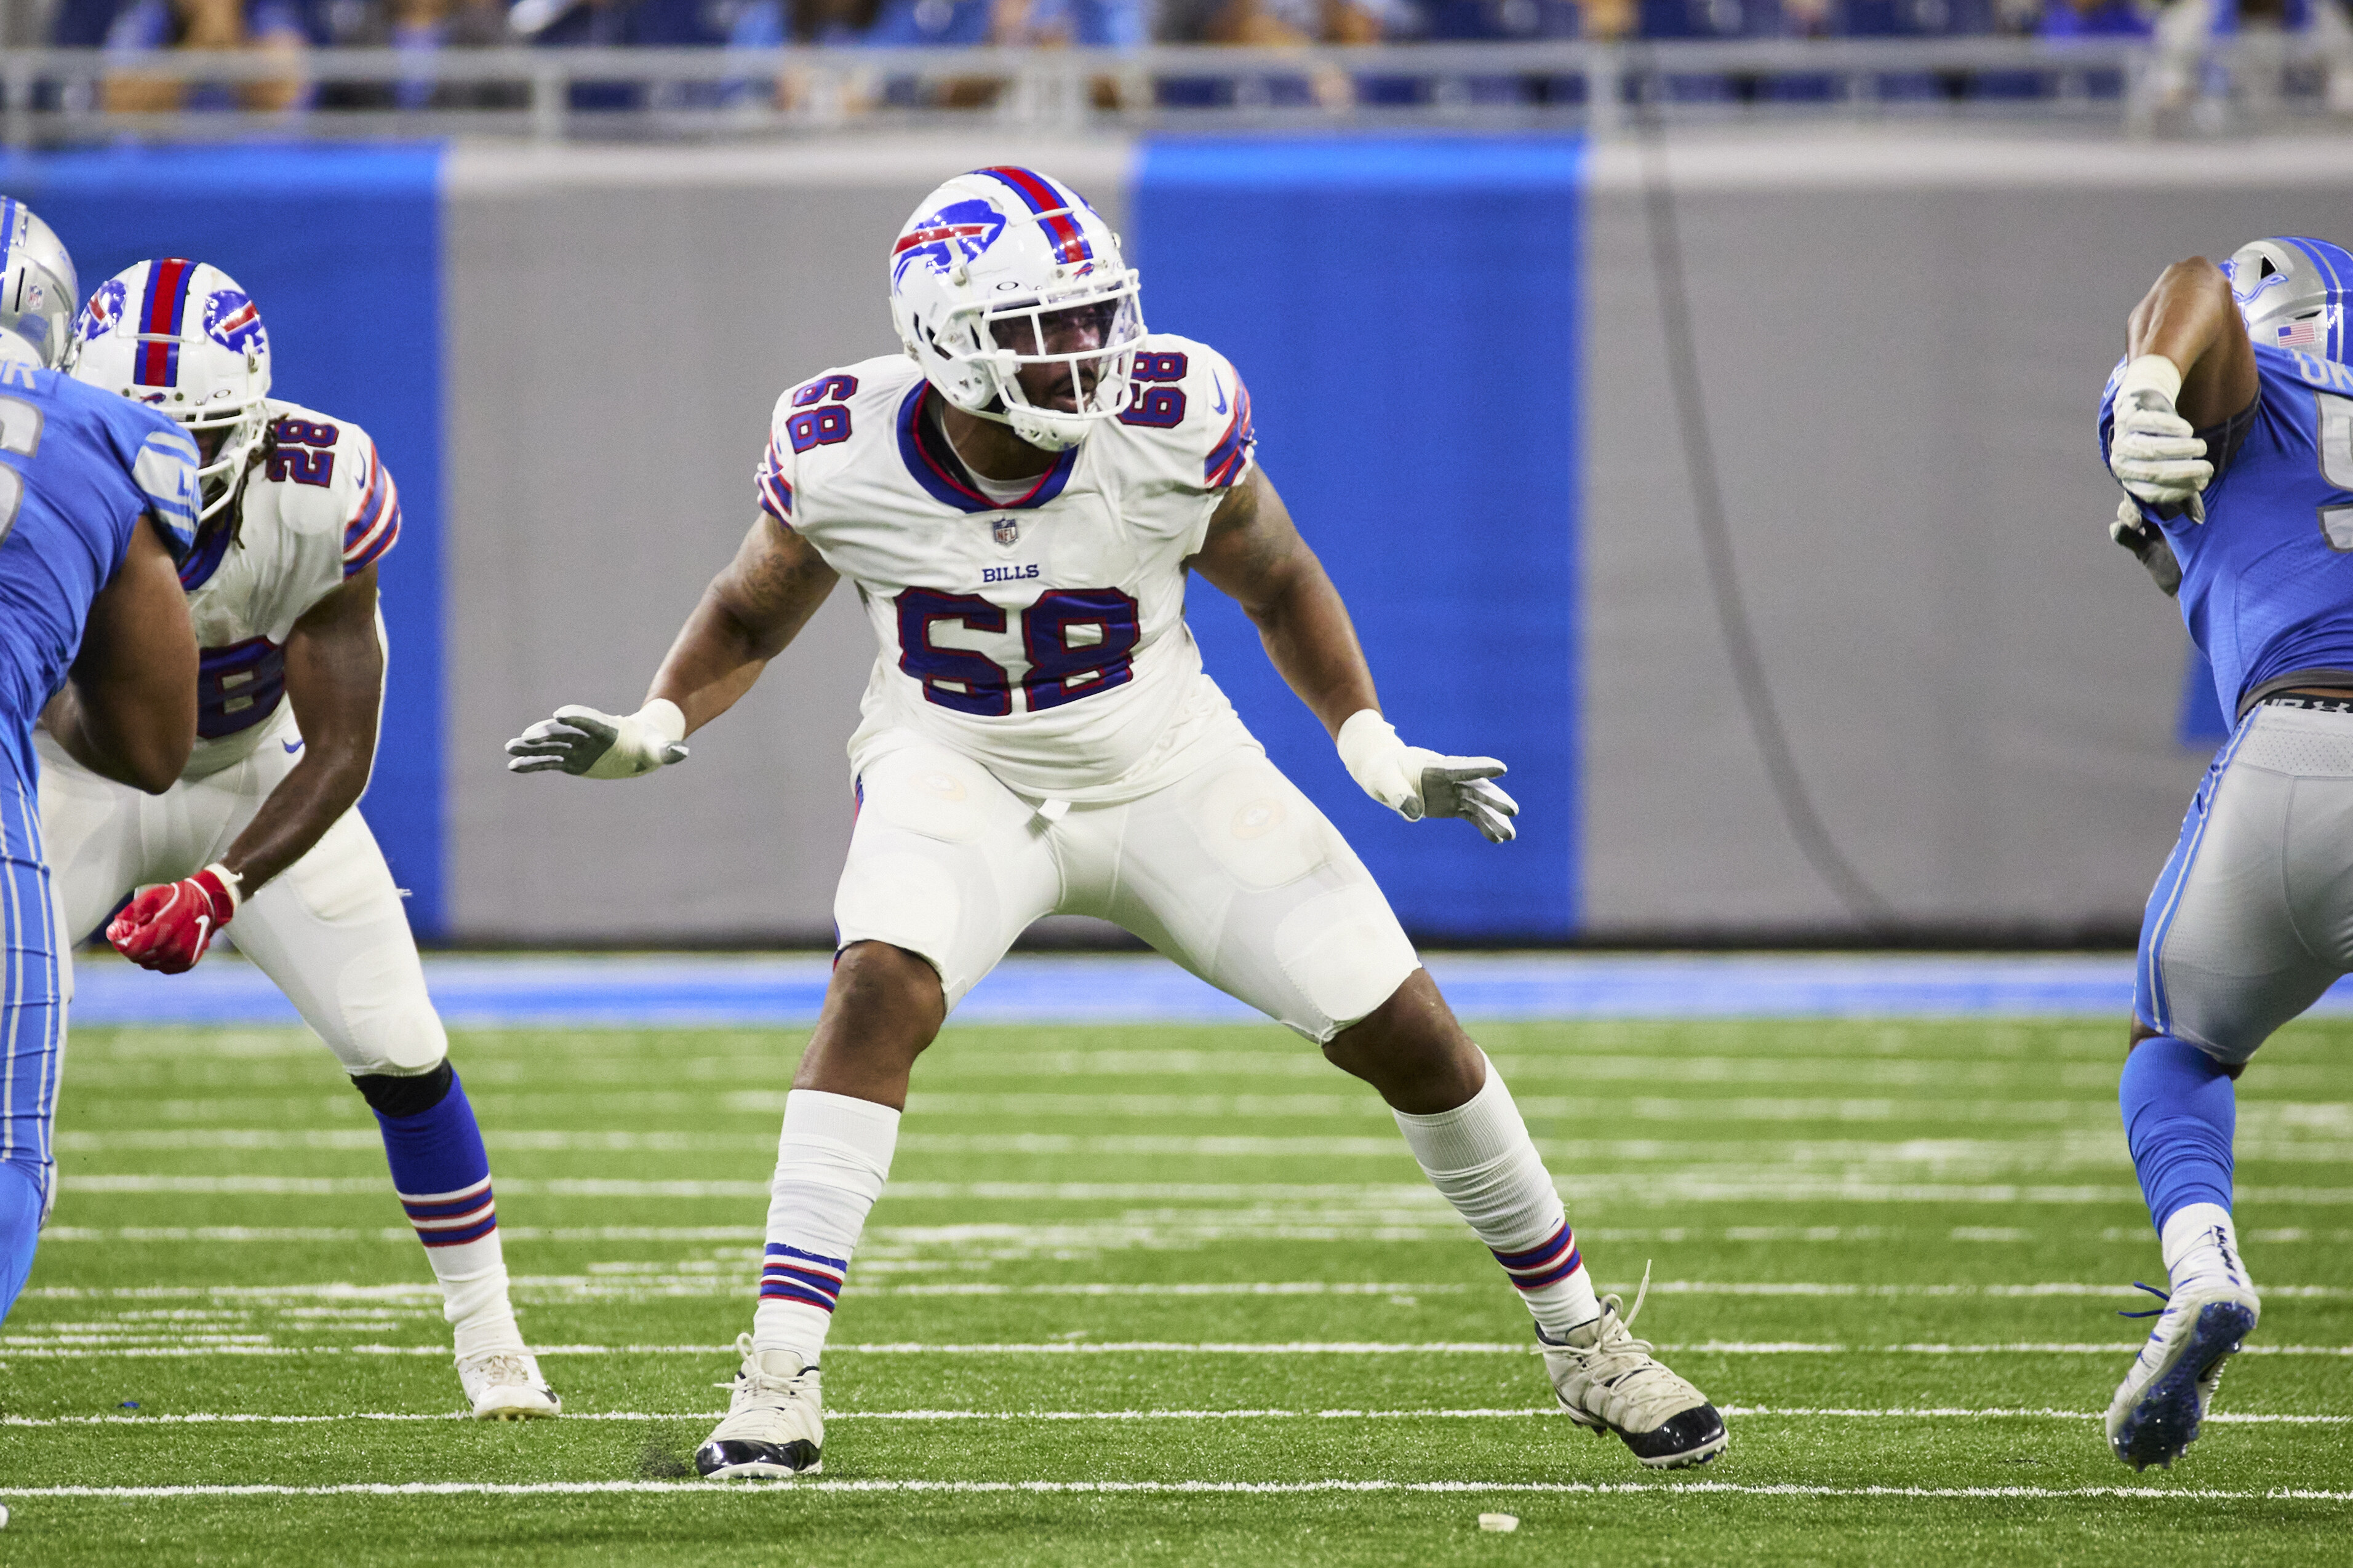 Bills' Bobby Hart suspended one game for hitting Titans coach